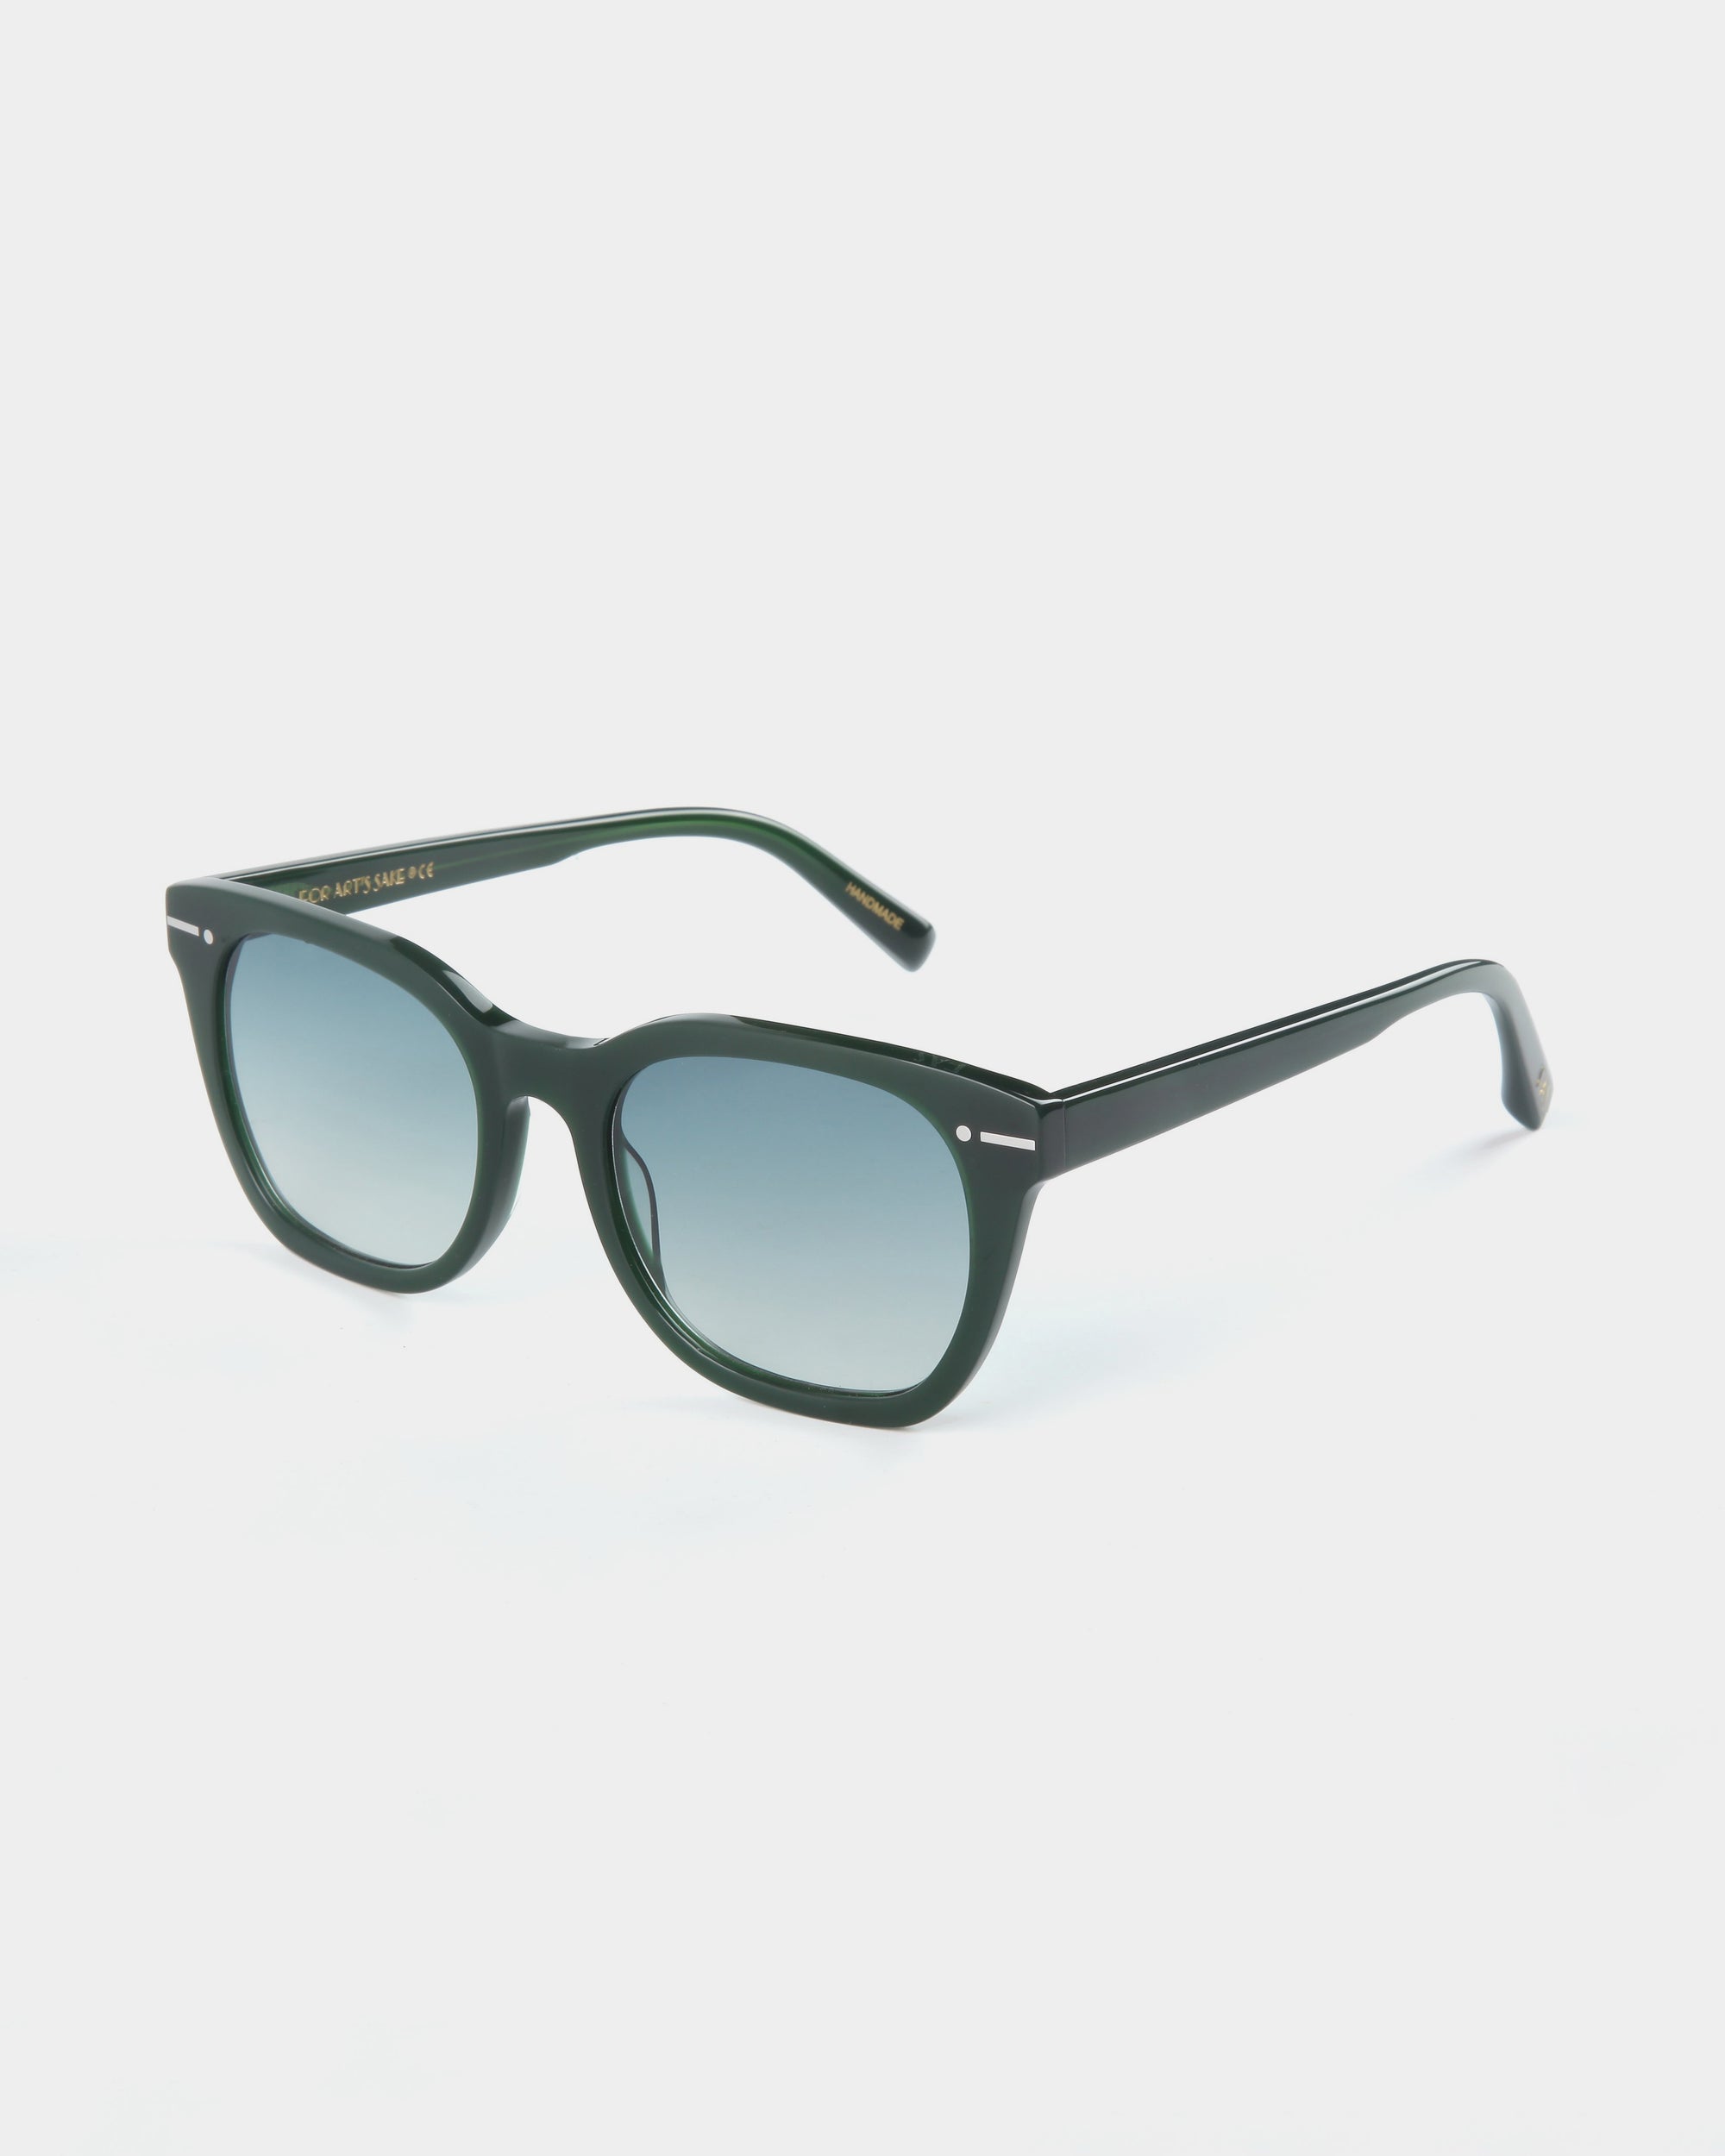 A pair of dark green, rectangular Jacuzzi sunglasses crafted from durable Mazzucchelli acetate with blue gradient nylon lenses offering full UVA &amp; UVB protection by For Art&#39;s Sake®. The frame has a glossy finish and small metal accents near the hinges. The background is a plain white surface.